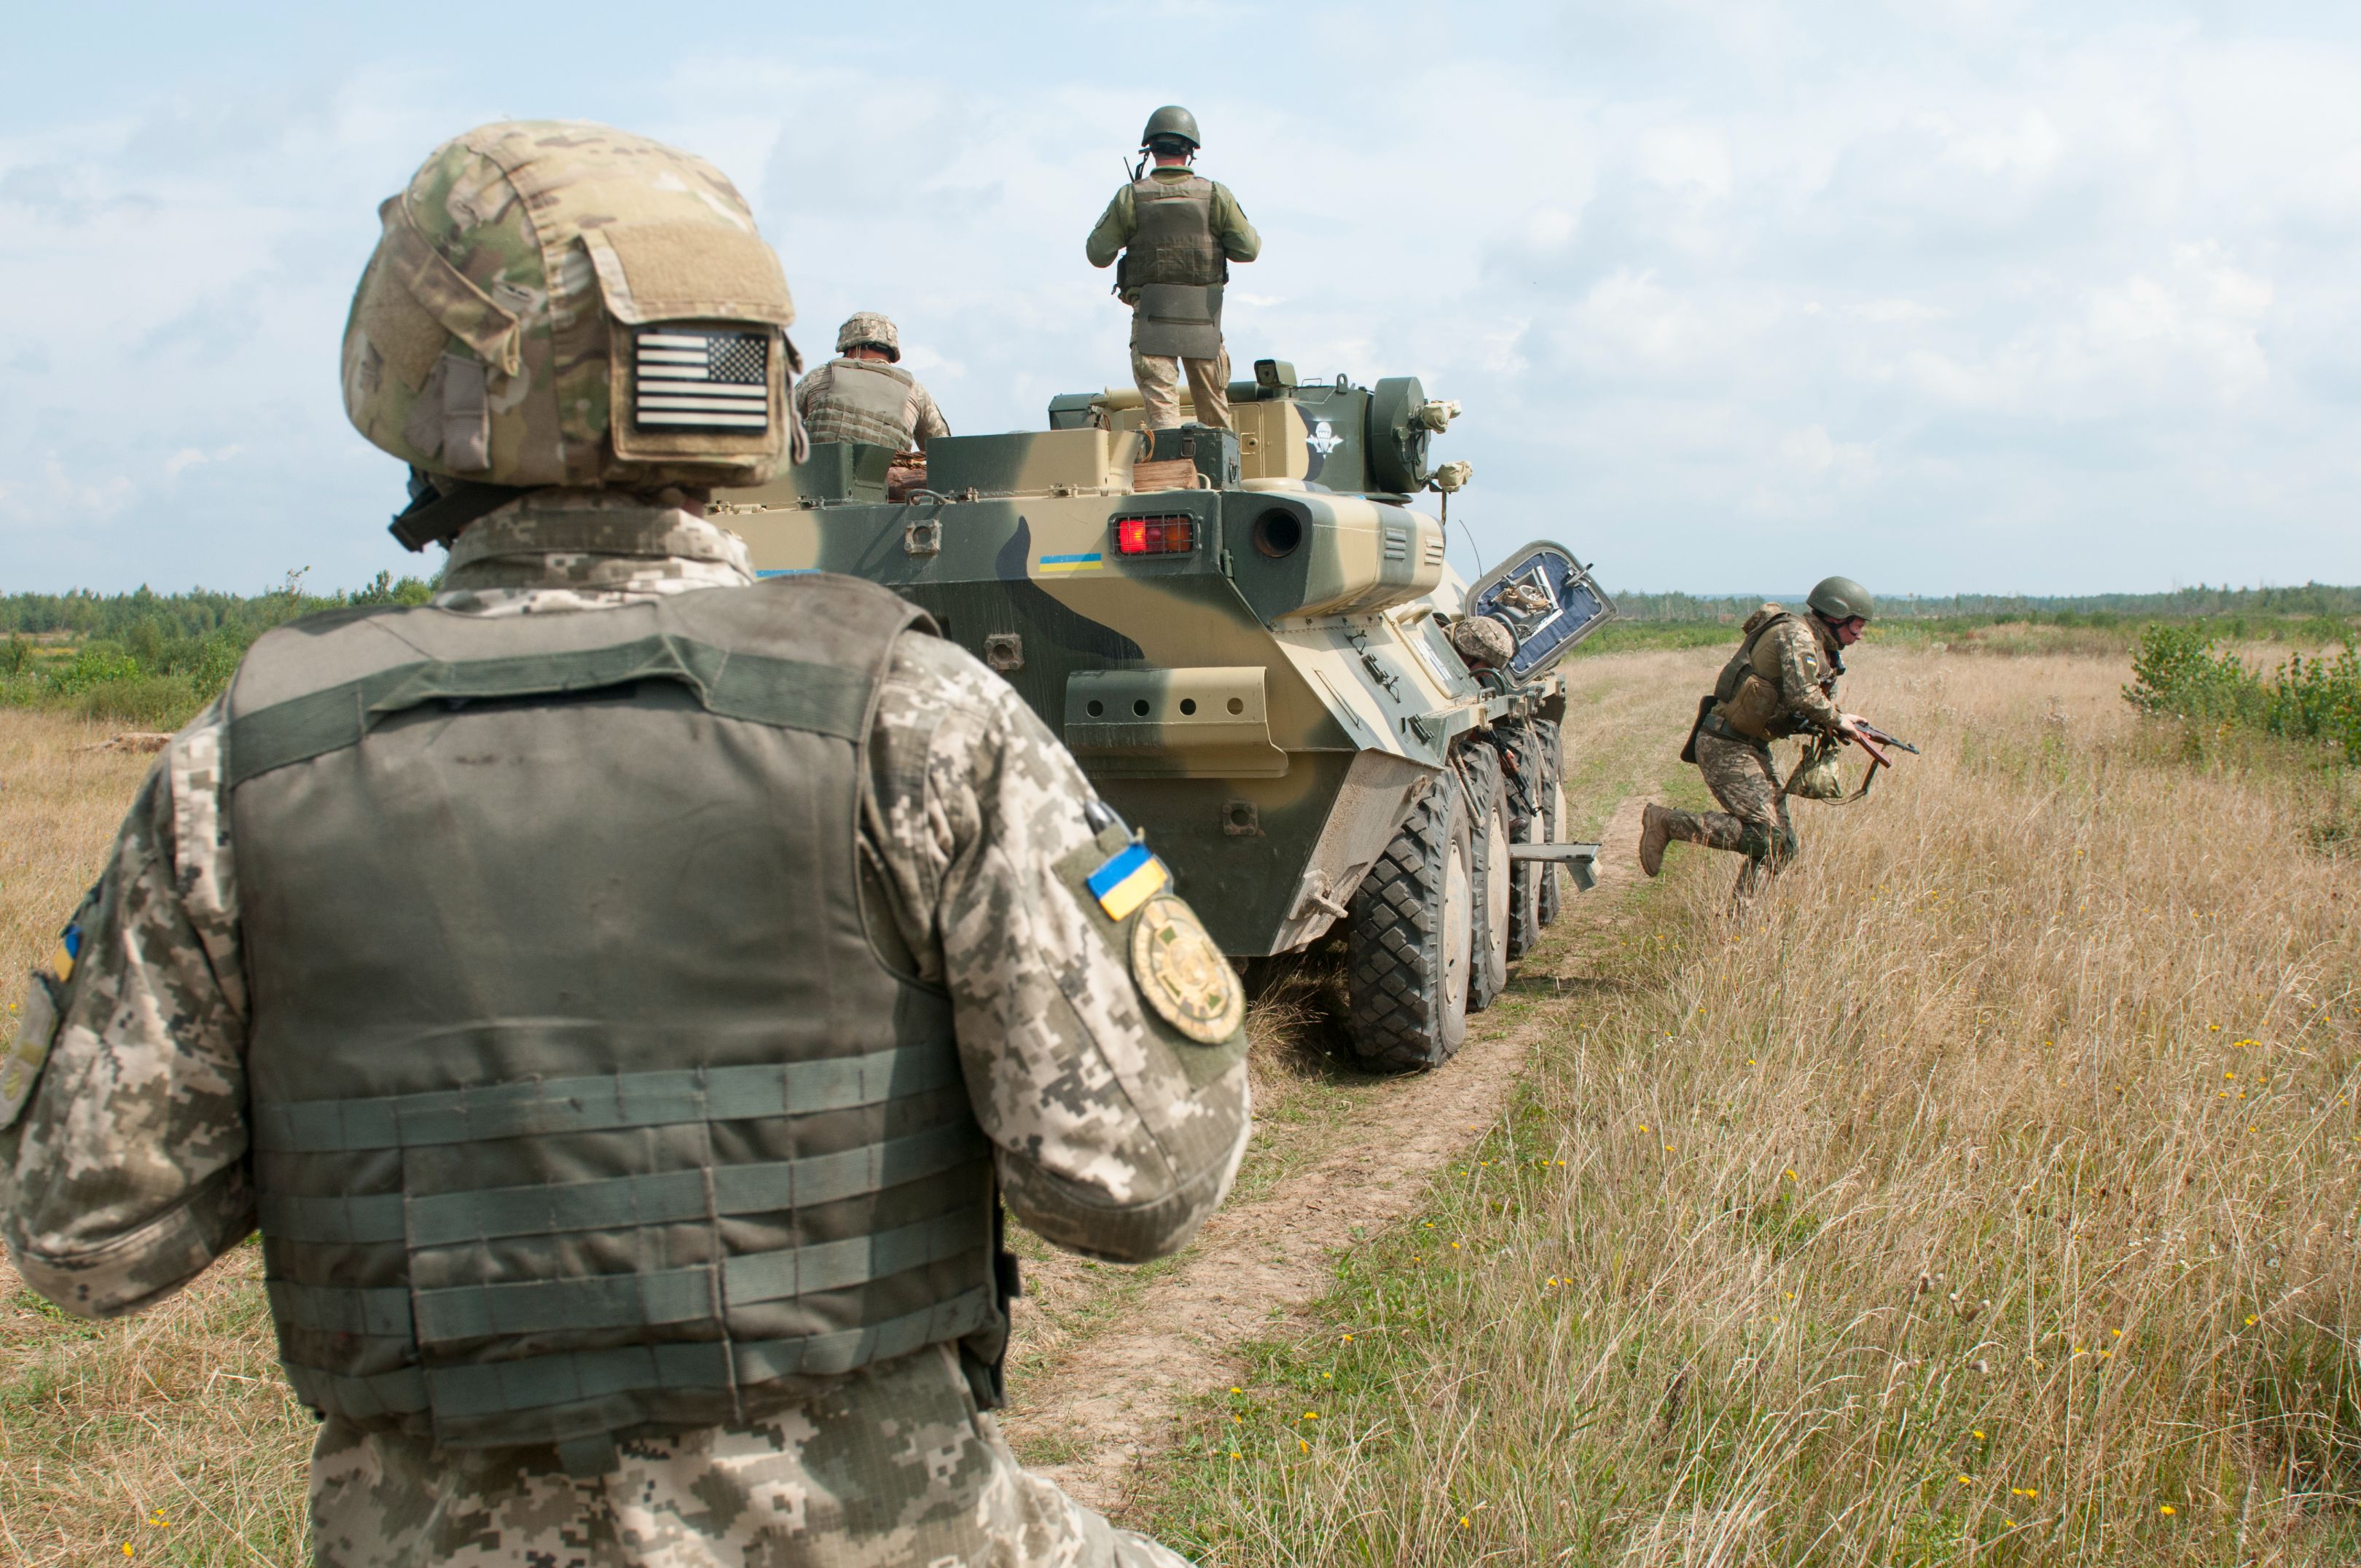 A Ukrainian Observer Coach Trainer looks on as soldiers from Ukraine’s 1st Battalion, 95th Separate Airmobile Brigade dismount their BTR-3 armored personnel carrier during combined mounted and dismounted movement techniques training at the Yavoriv Combat Training Center on the International Peacekeeping and Security Center near Yavoriv, Ukraine on Aug. 21.